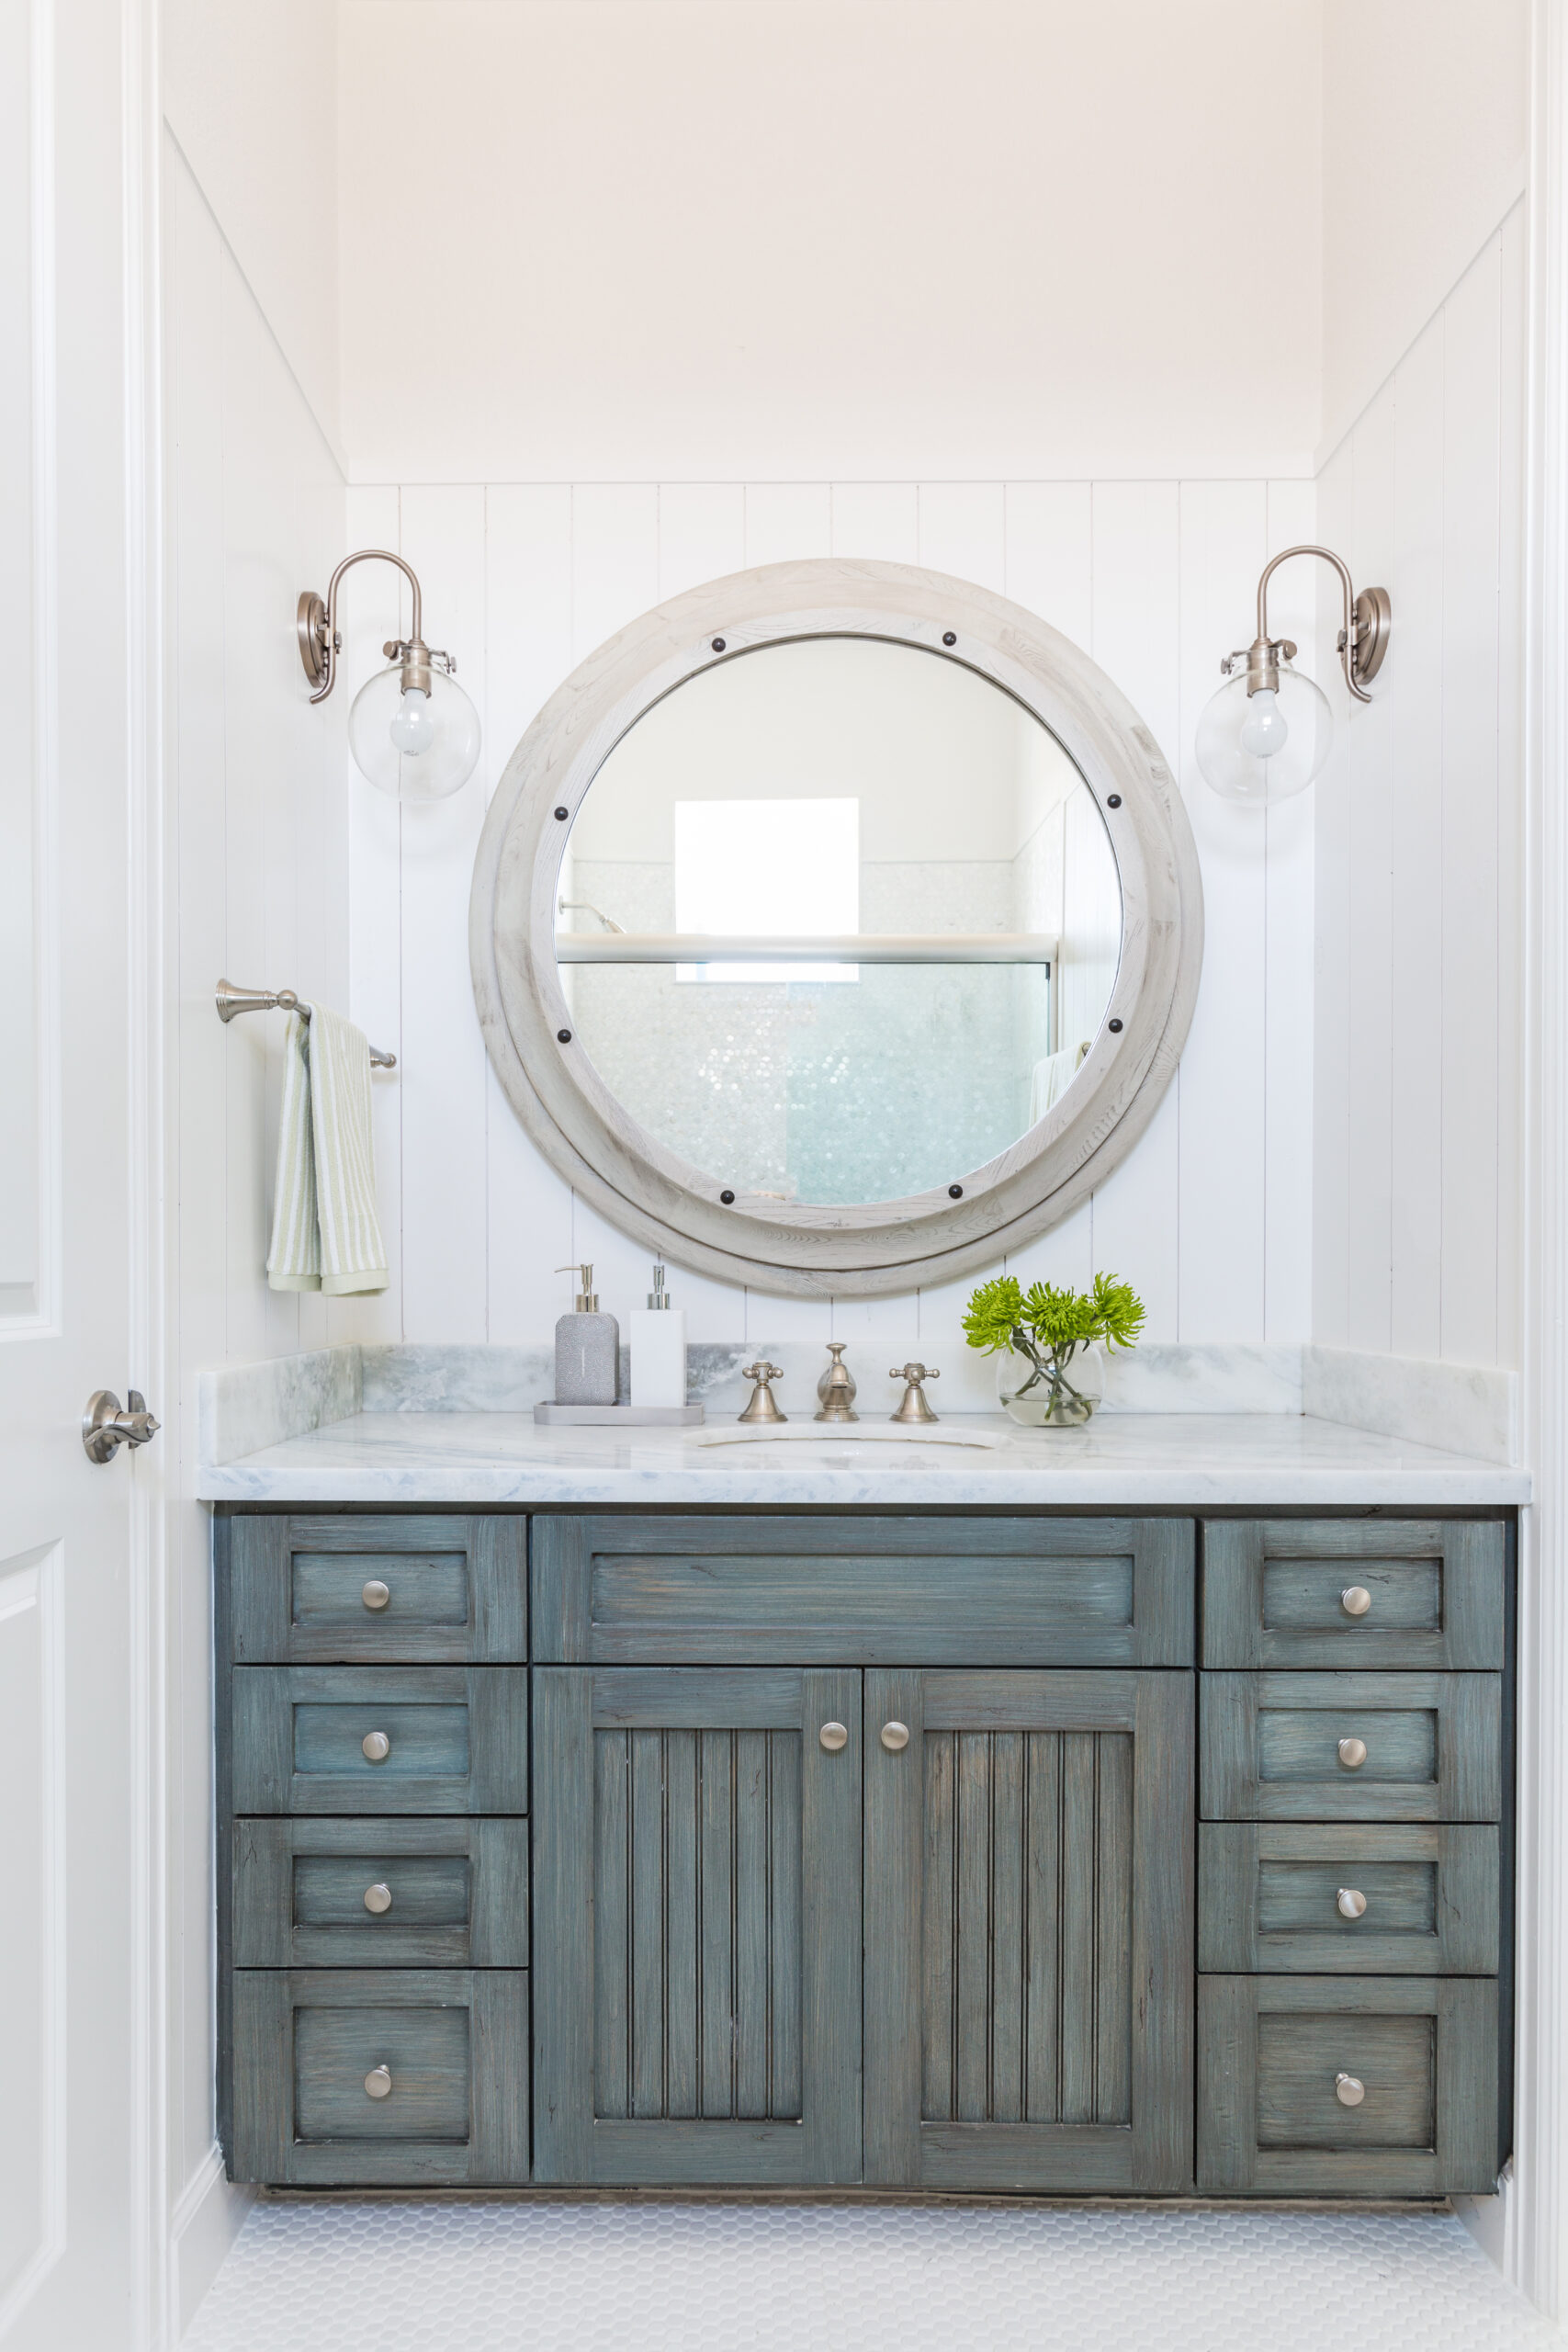 Beautiful Round Mirrors for Bathrooms! - Laura U Design Collective